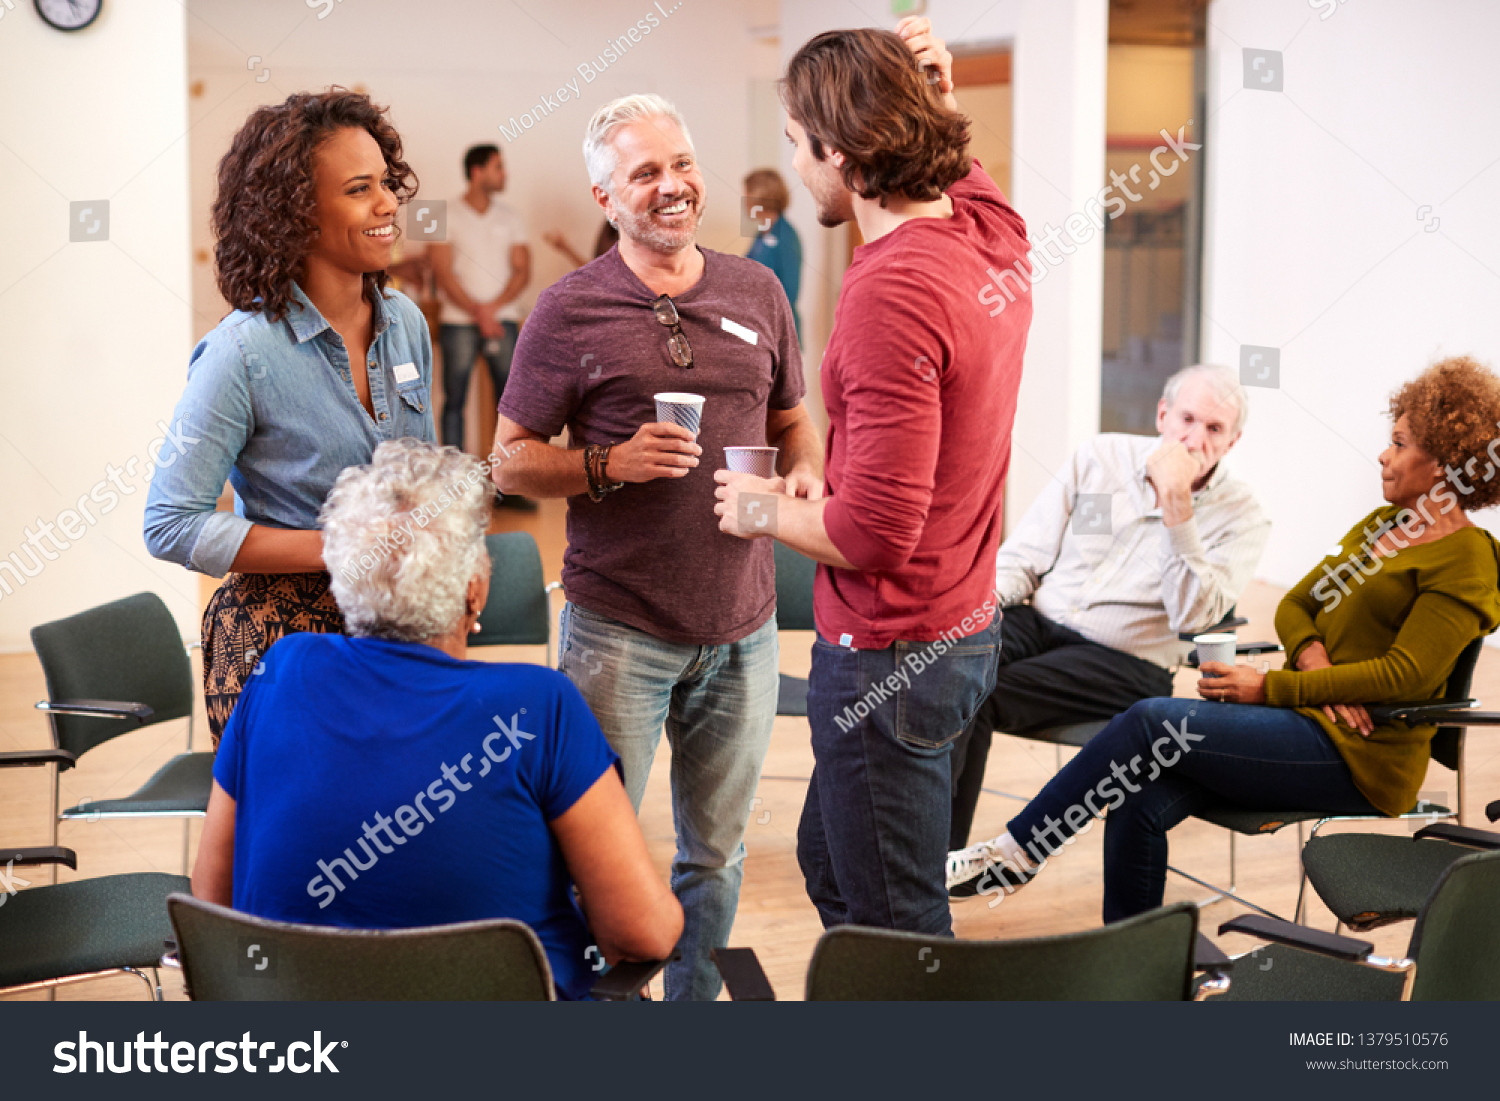 Group Of People Socializing After Meeting In Community Center #1379510576